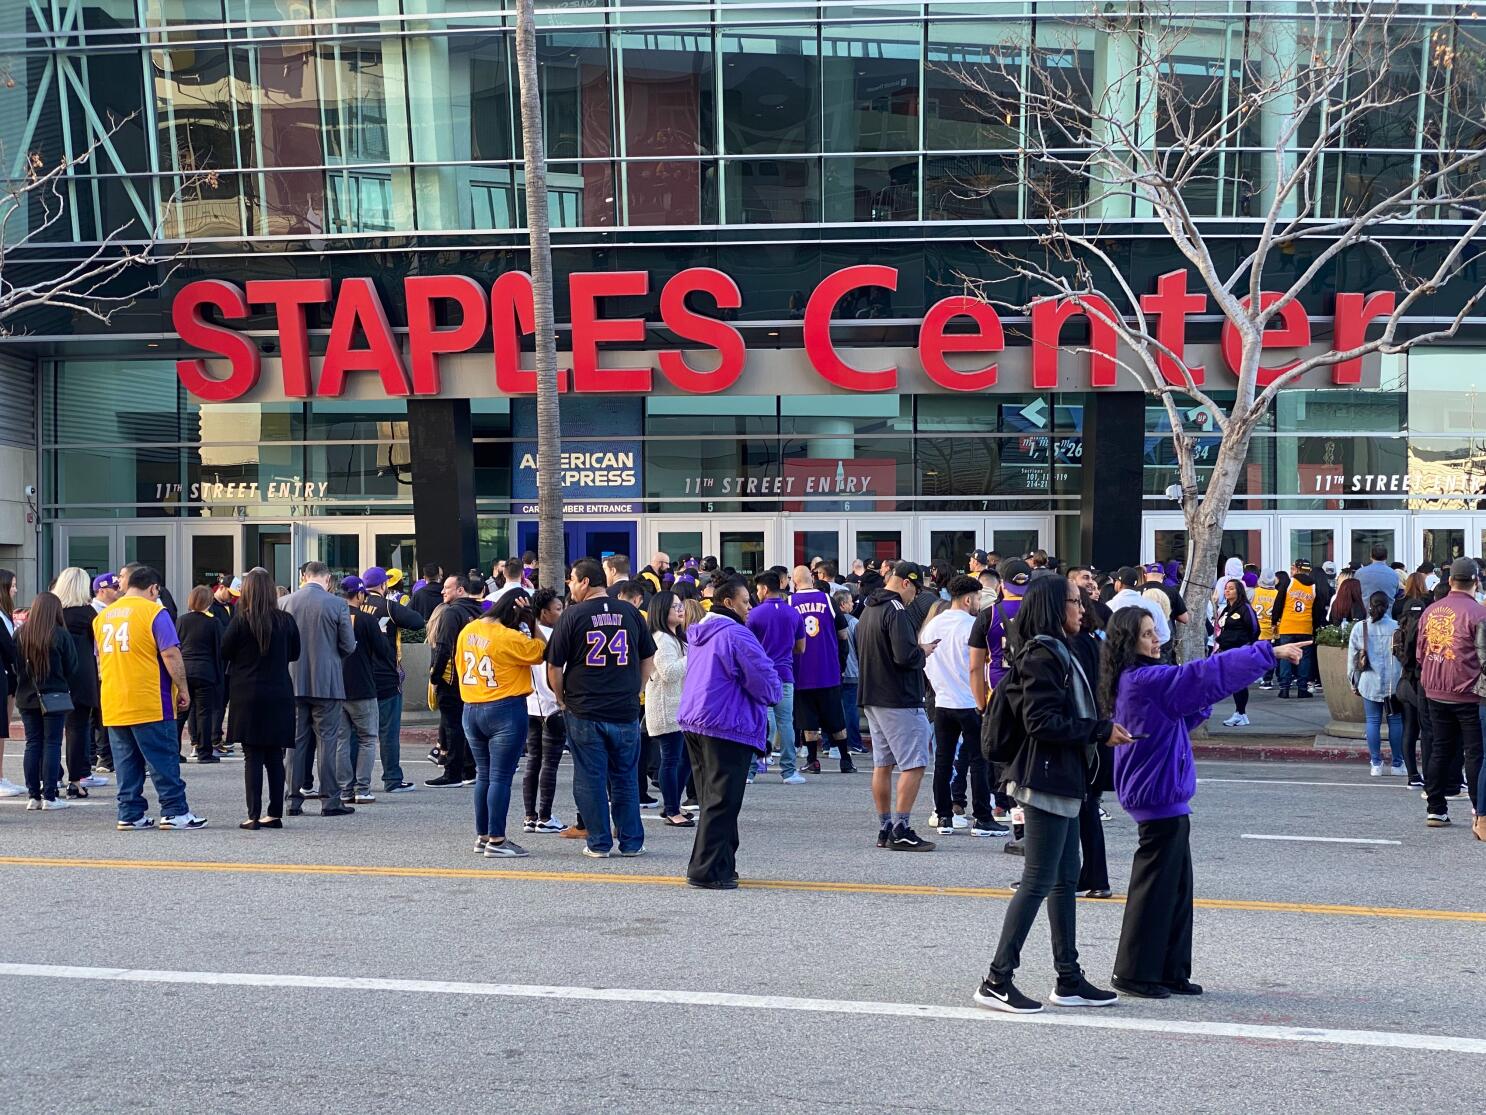 This Day In Lakers History: 'Staples Center' Name Changed To